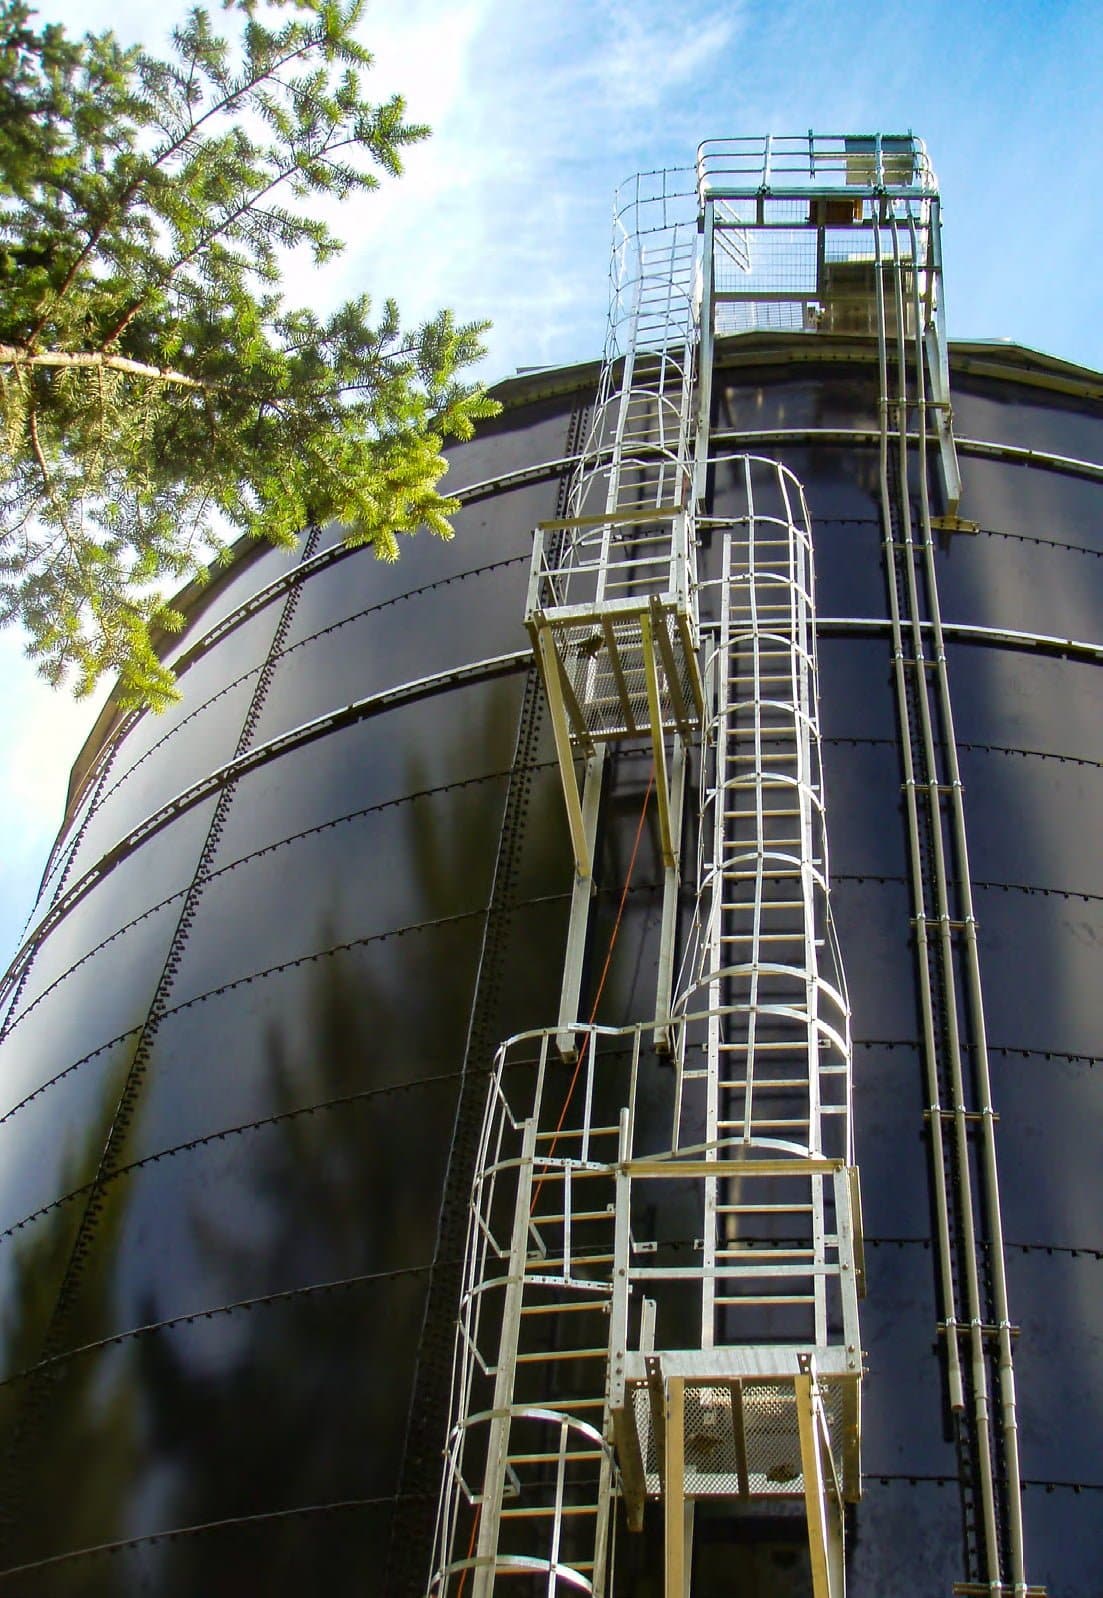 High-quality Glass-Fused-To-Steel Tank